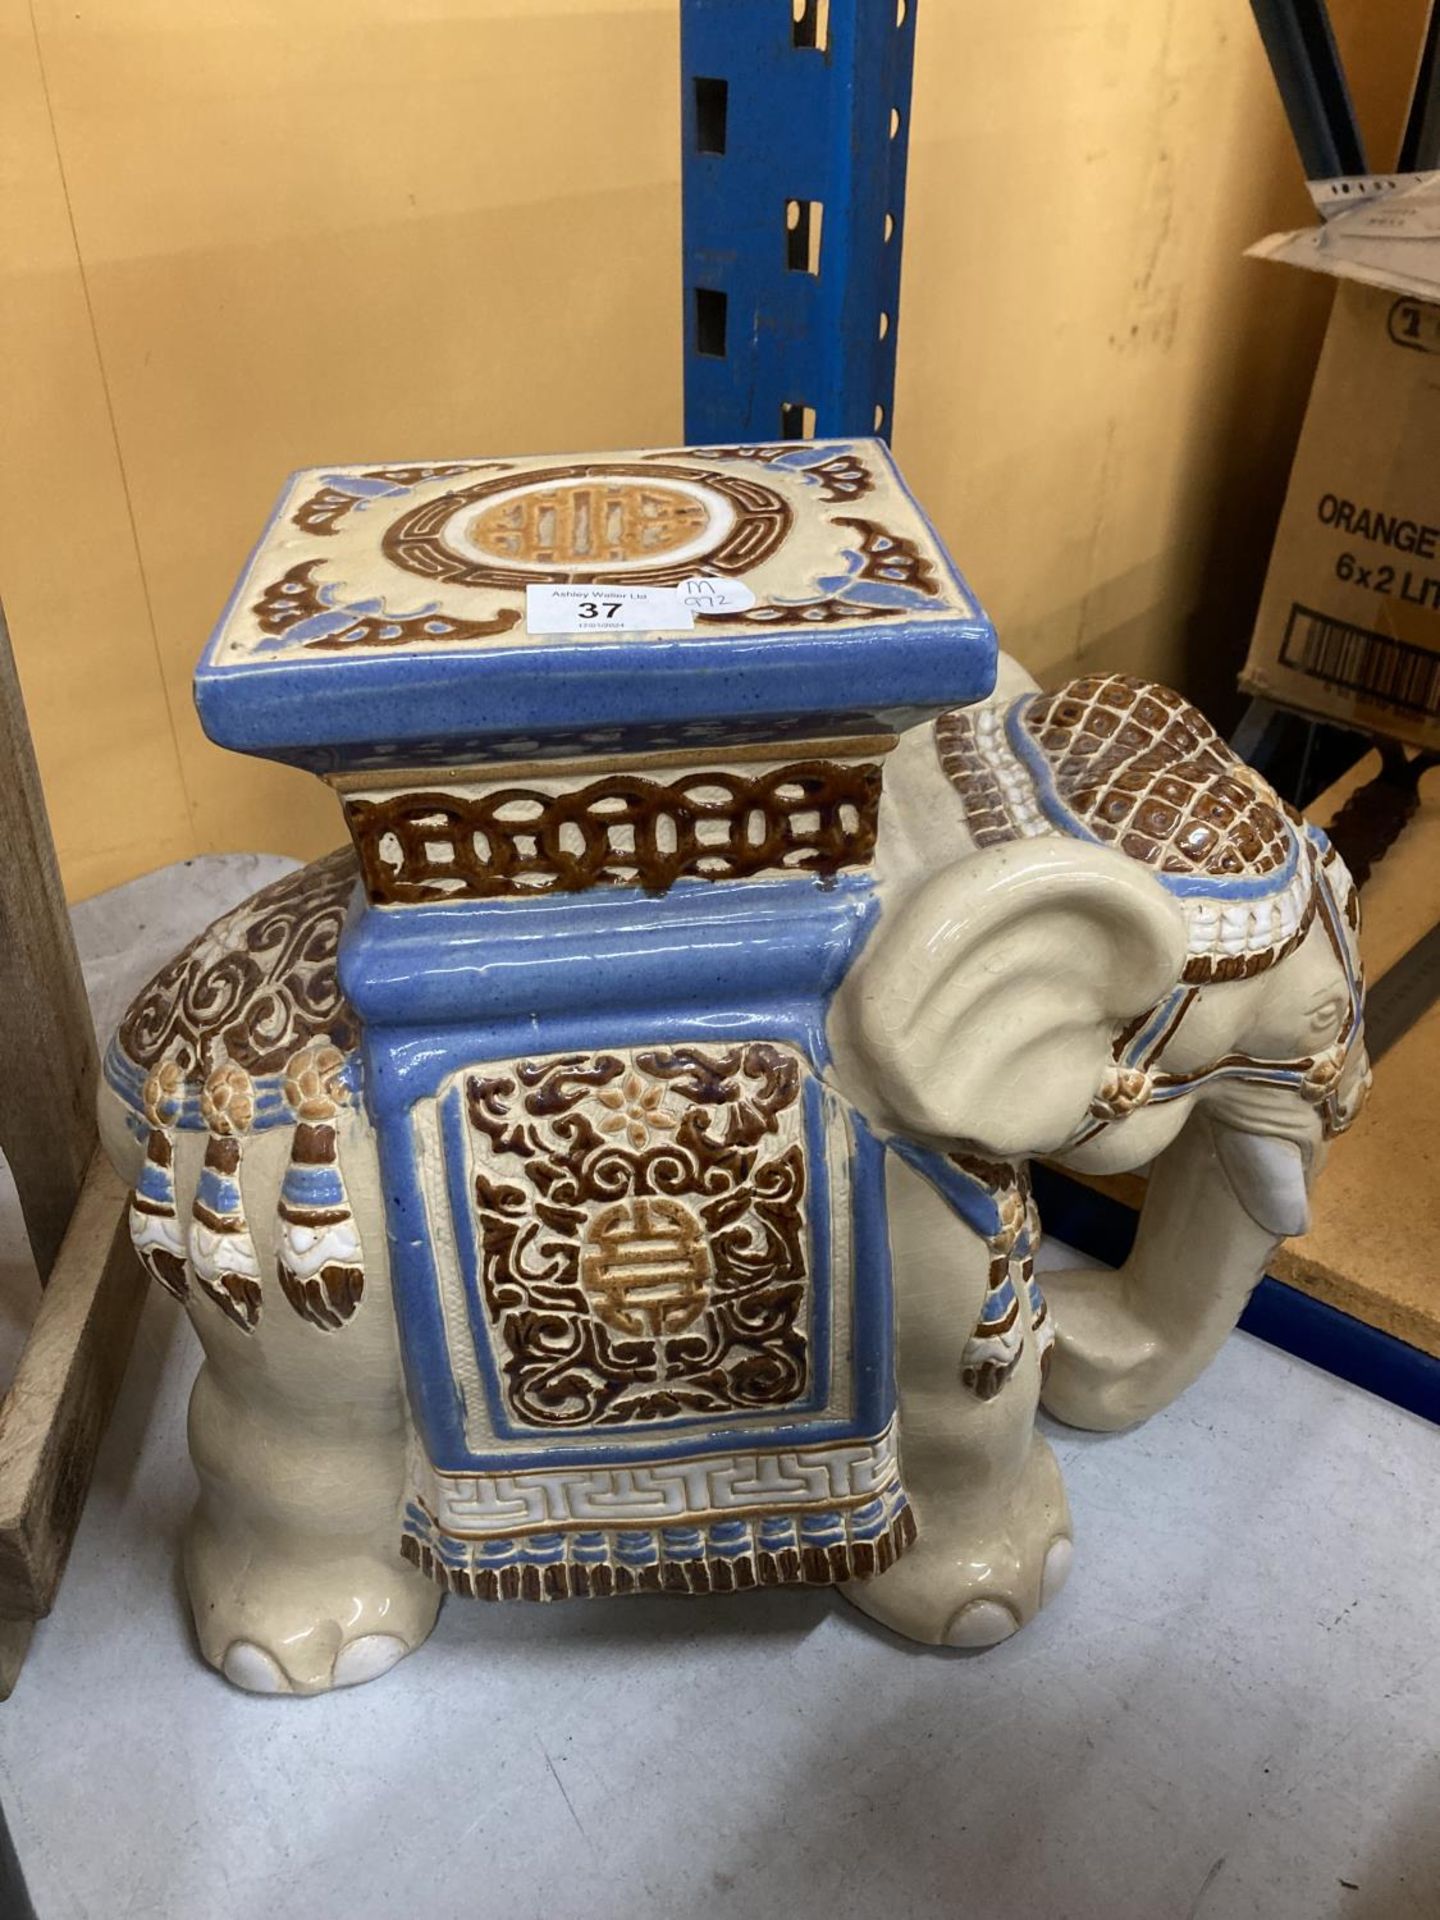 A LARGE CERAMIC ELEPHANT STAND/SEAT